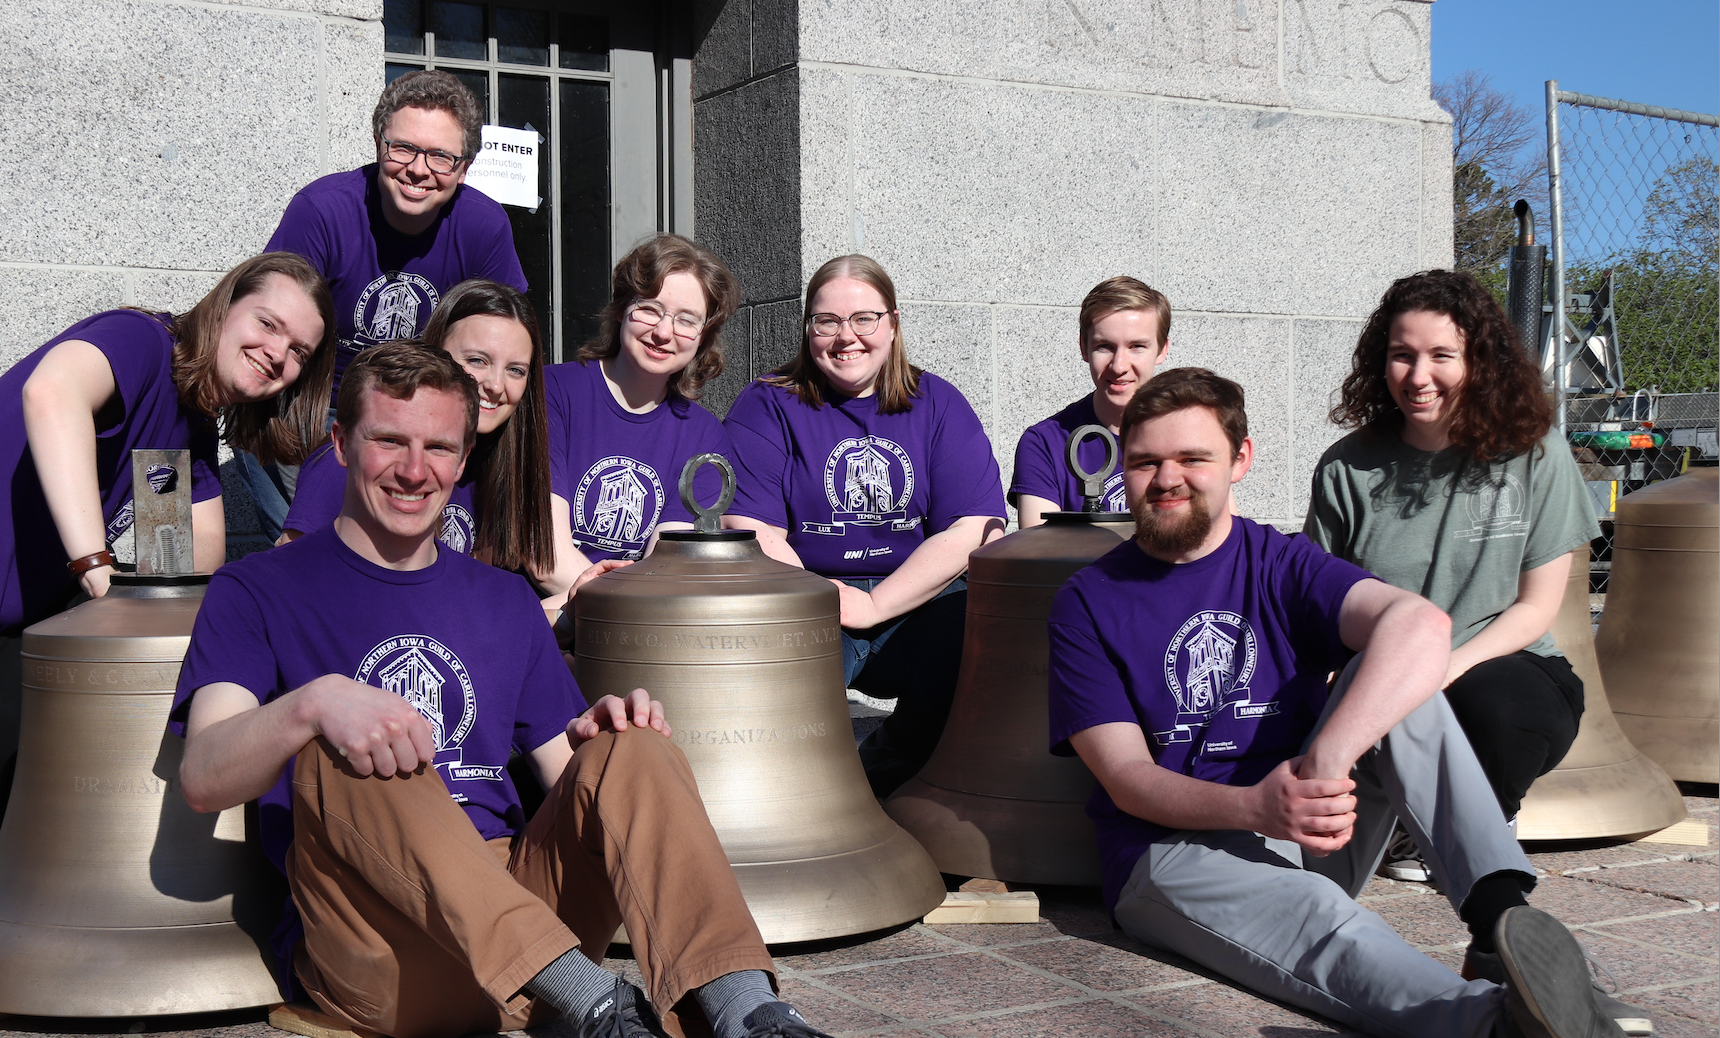 Carillon guild next to student organization bell